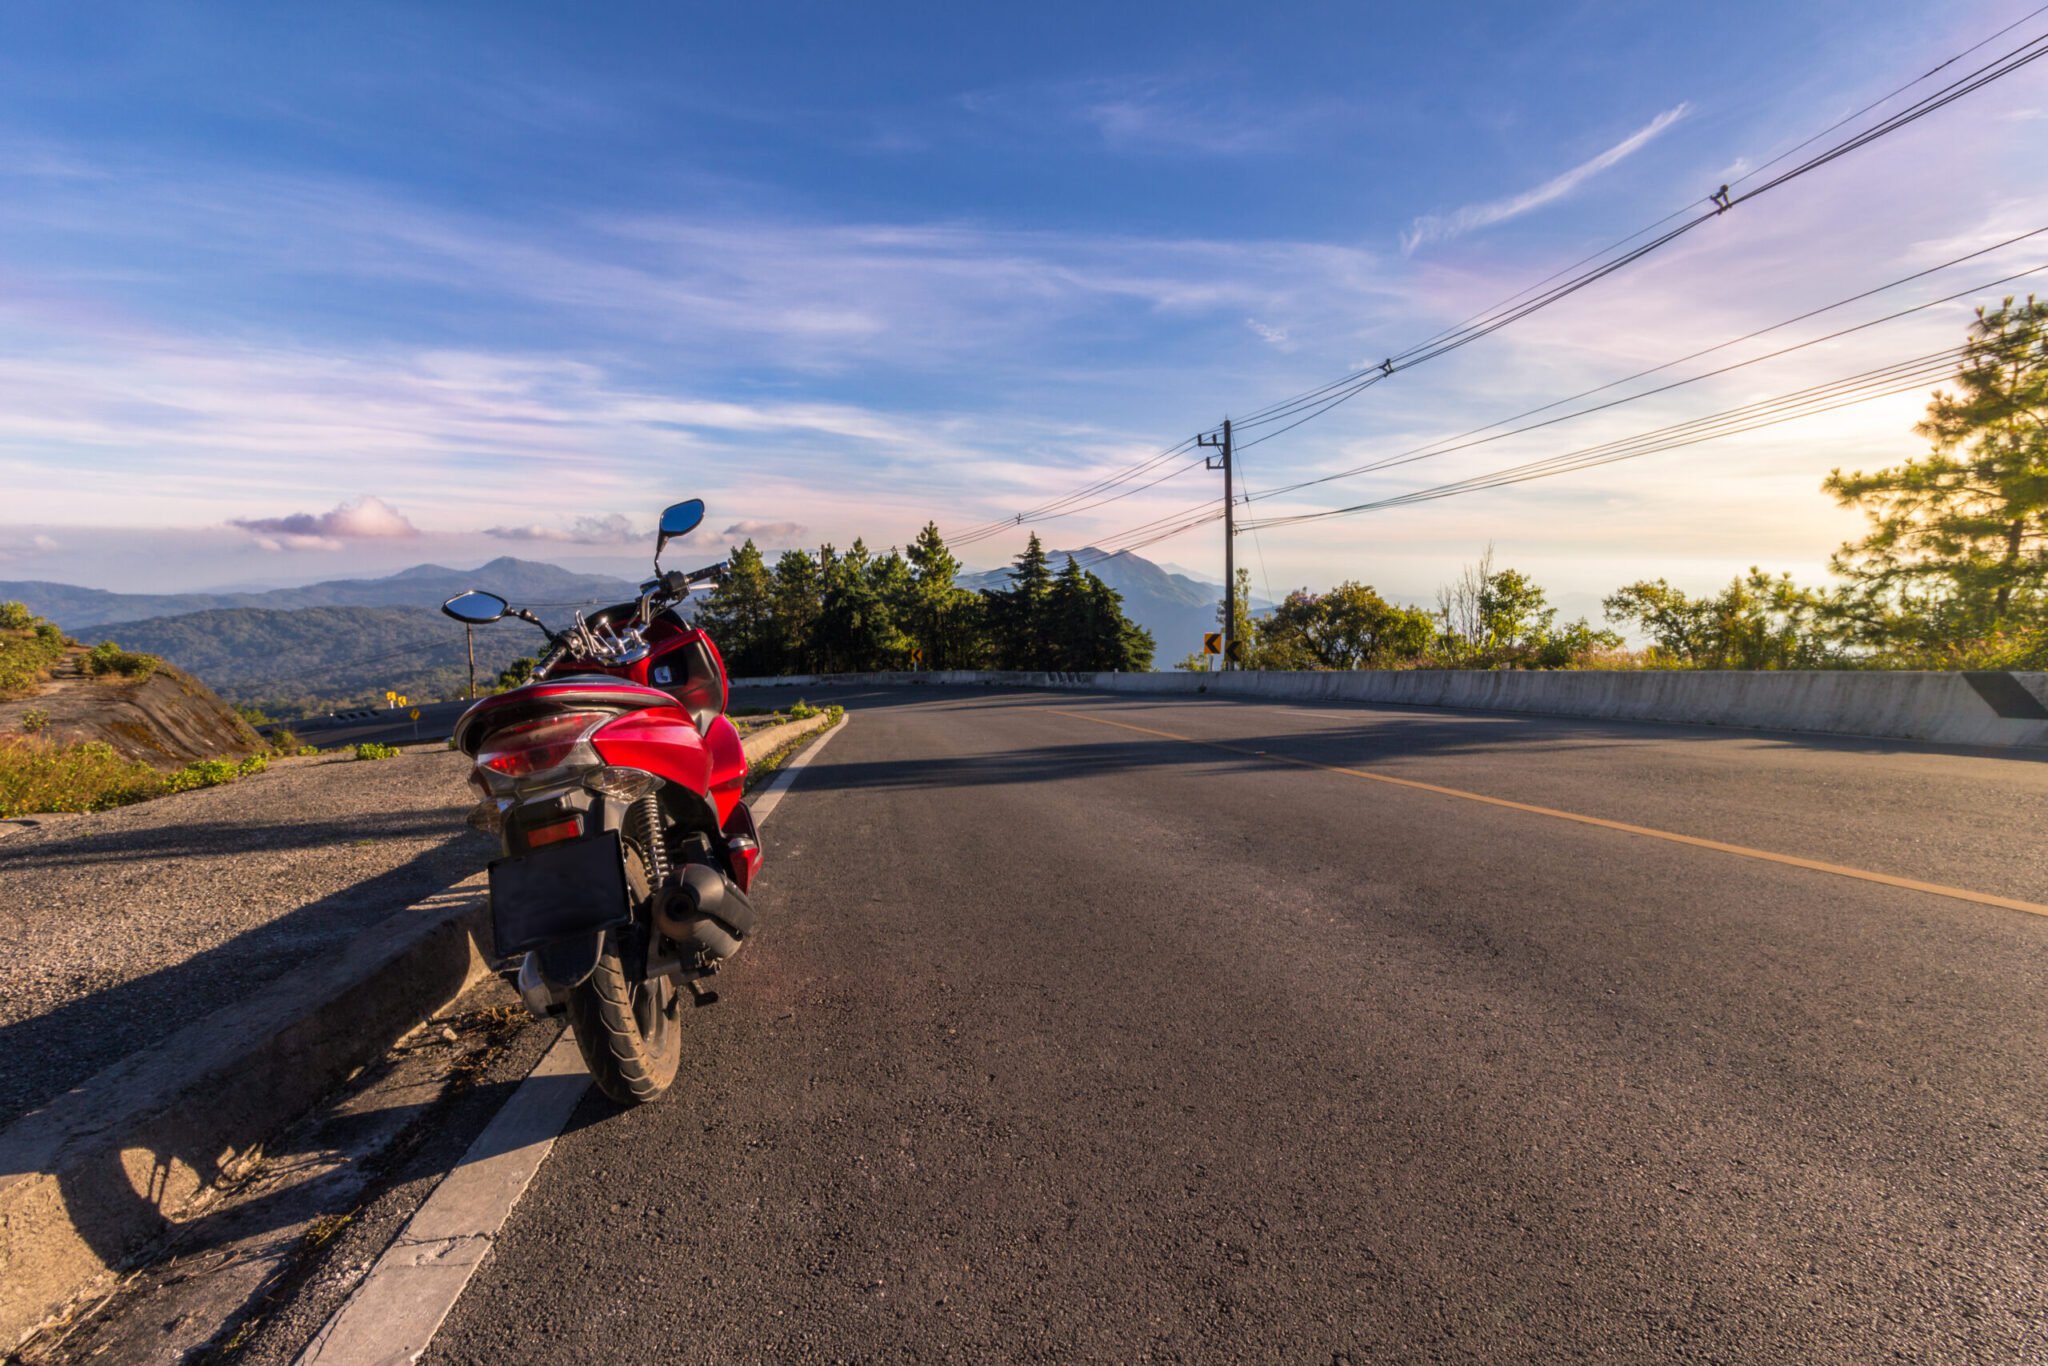 Motorcycle, serpentine road, mountains on background and blue sky on sunset. Active lifestyle and vacation concept.